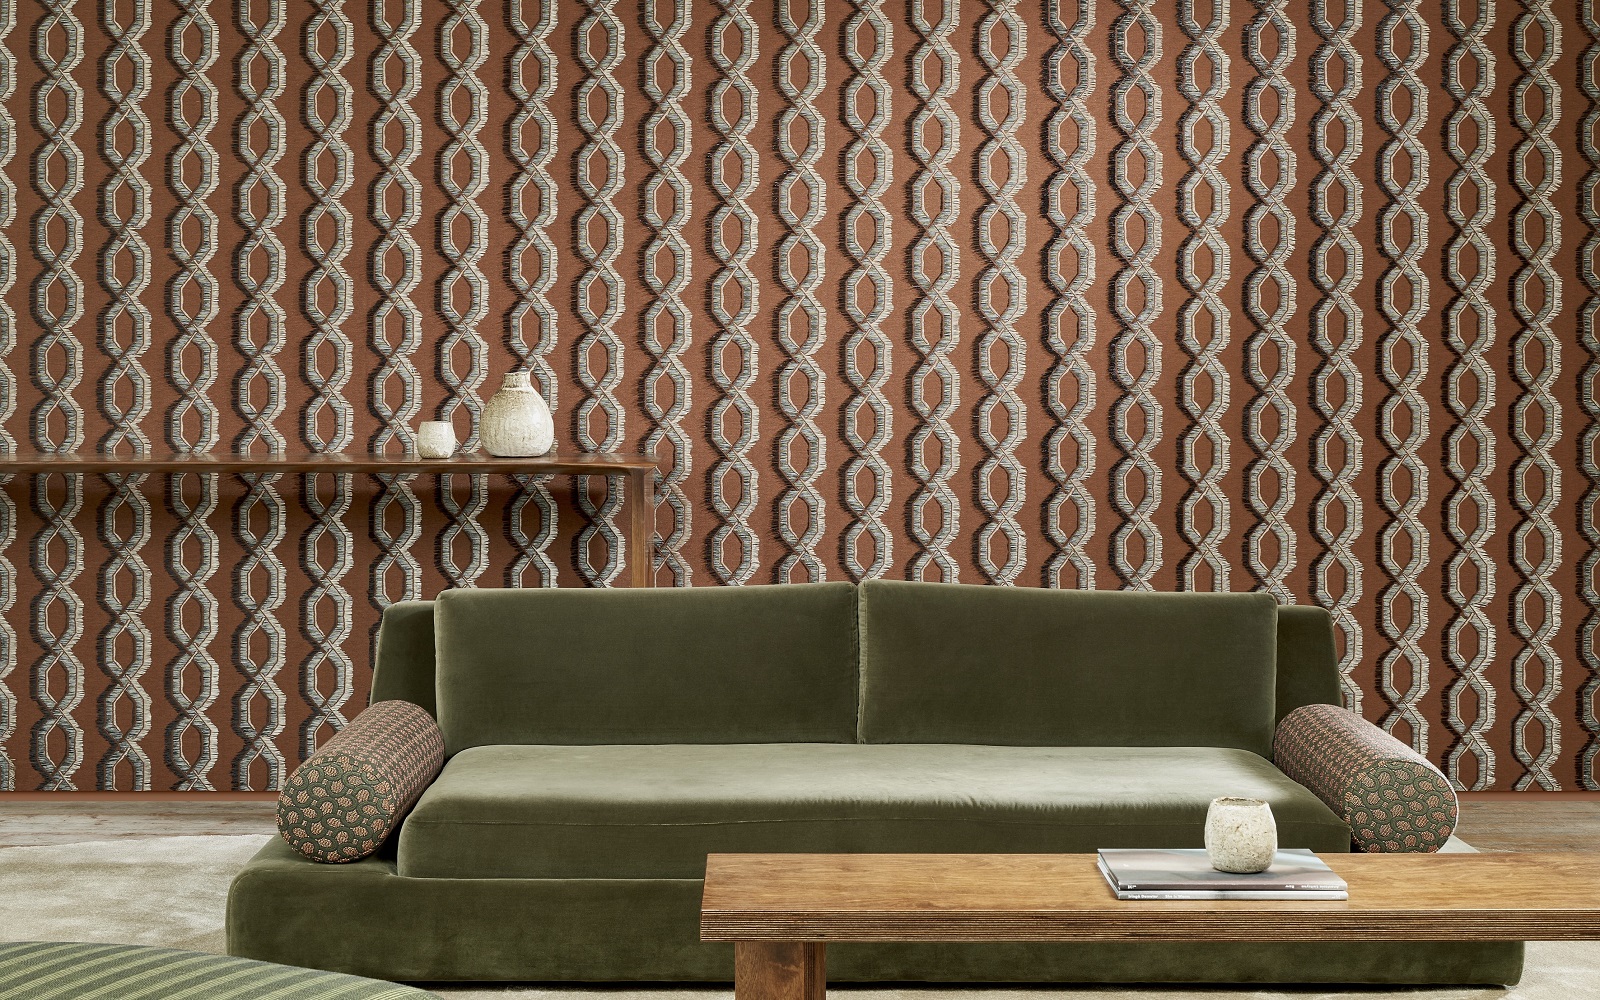 low green velvet couch and wooden coffee table in front of patterned Arte wallcovering from Le Couturier collection